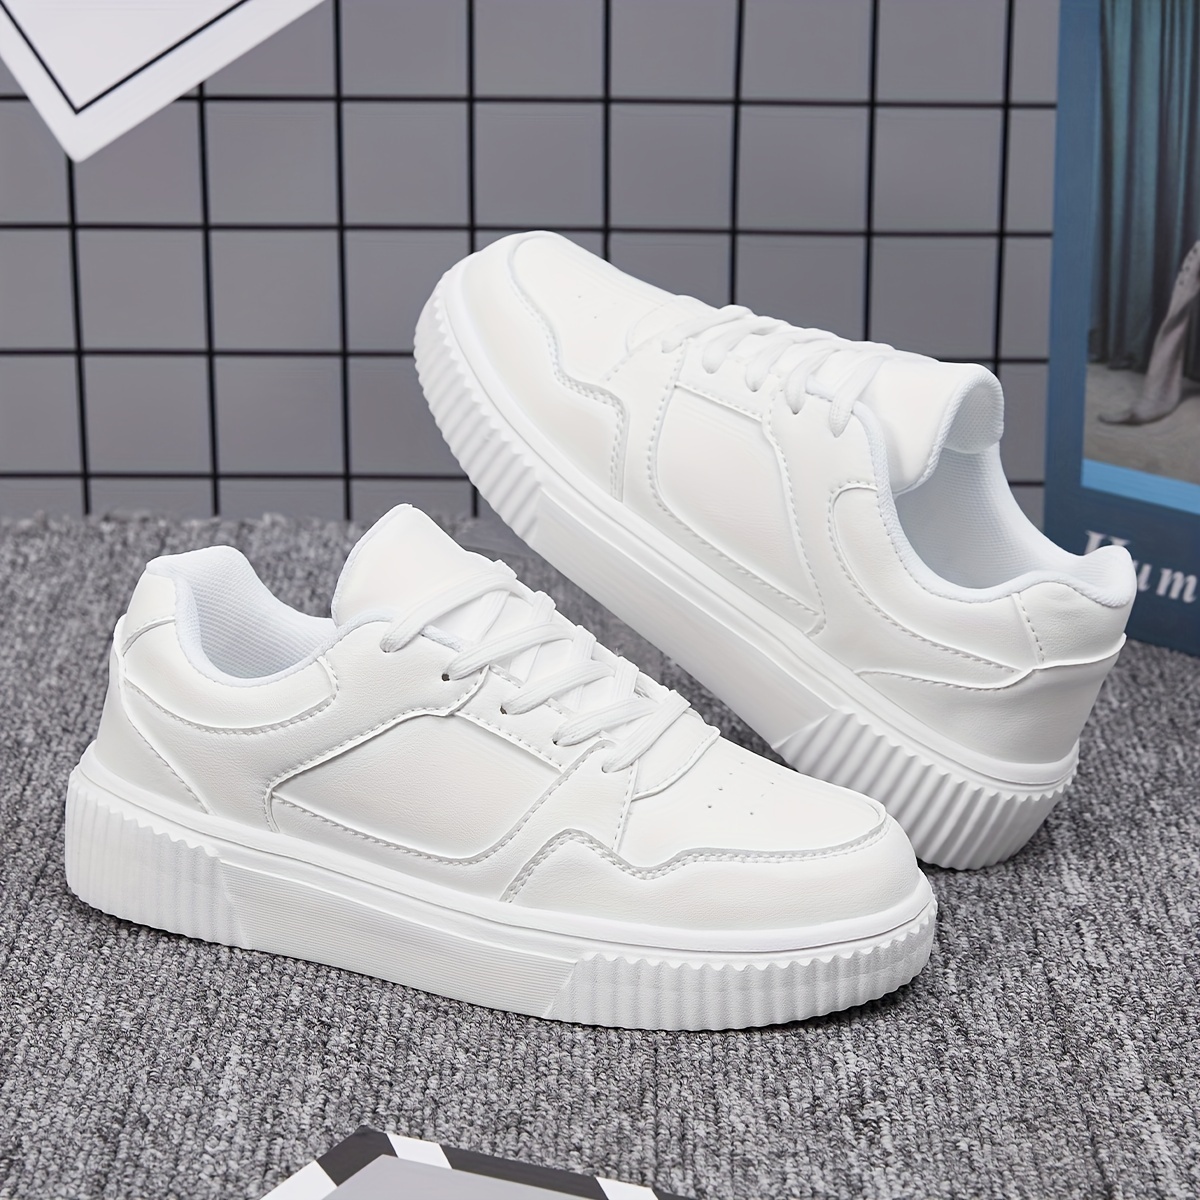 Women's Solid Color White Sneakers, Lace Up Soft Sole Platform Biscuit  Skate Shoes, Low-top Walking Shoes